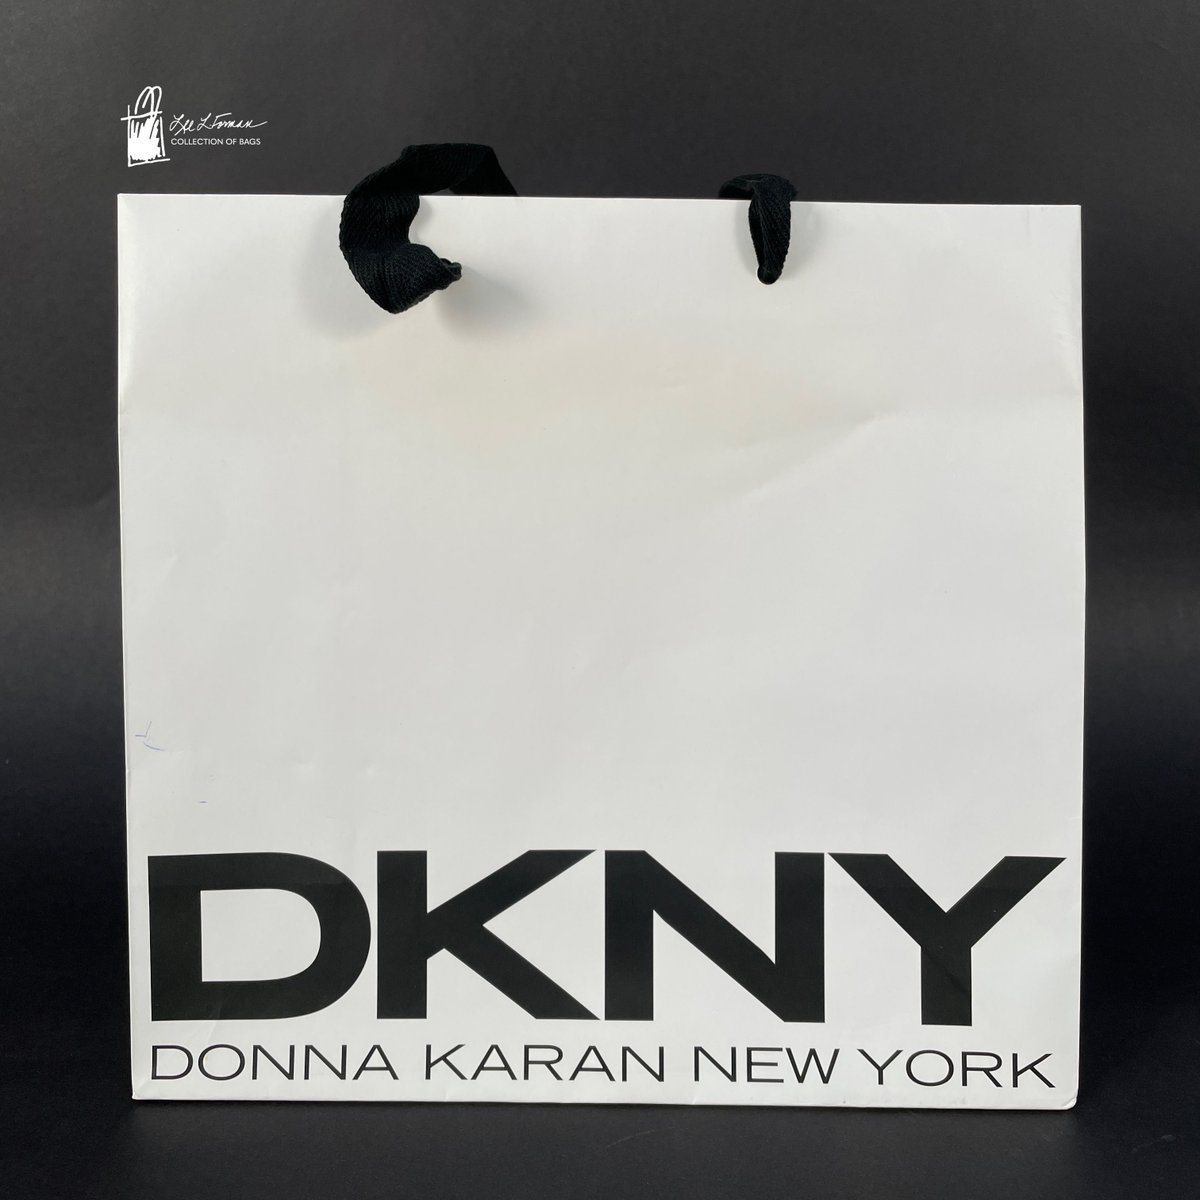 46/365: American fashion designer Donna Karan began her career working with Anne Klein in the late 1960s before launching her own label. She released her first women's collection in 1985; 3 years later she expanded to launch Donna Karan New York.